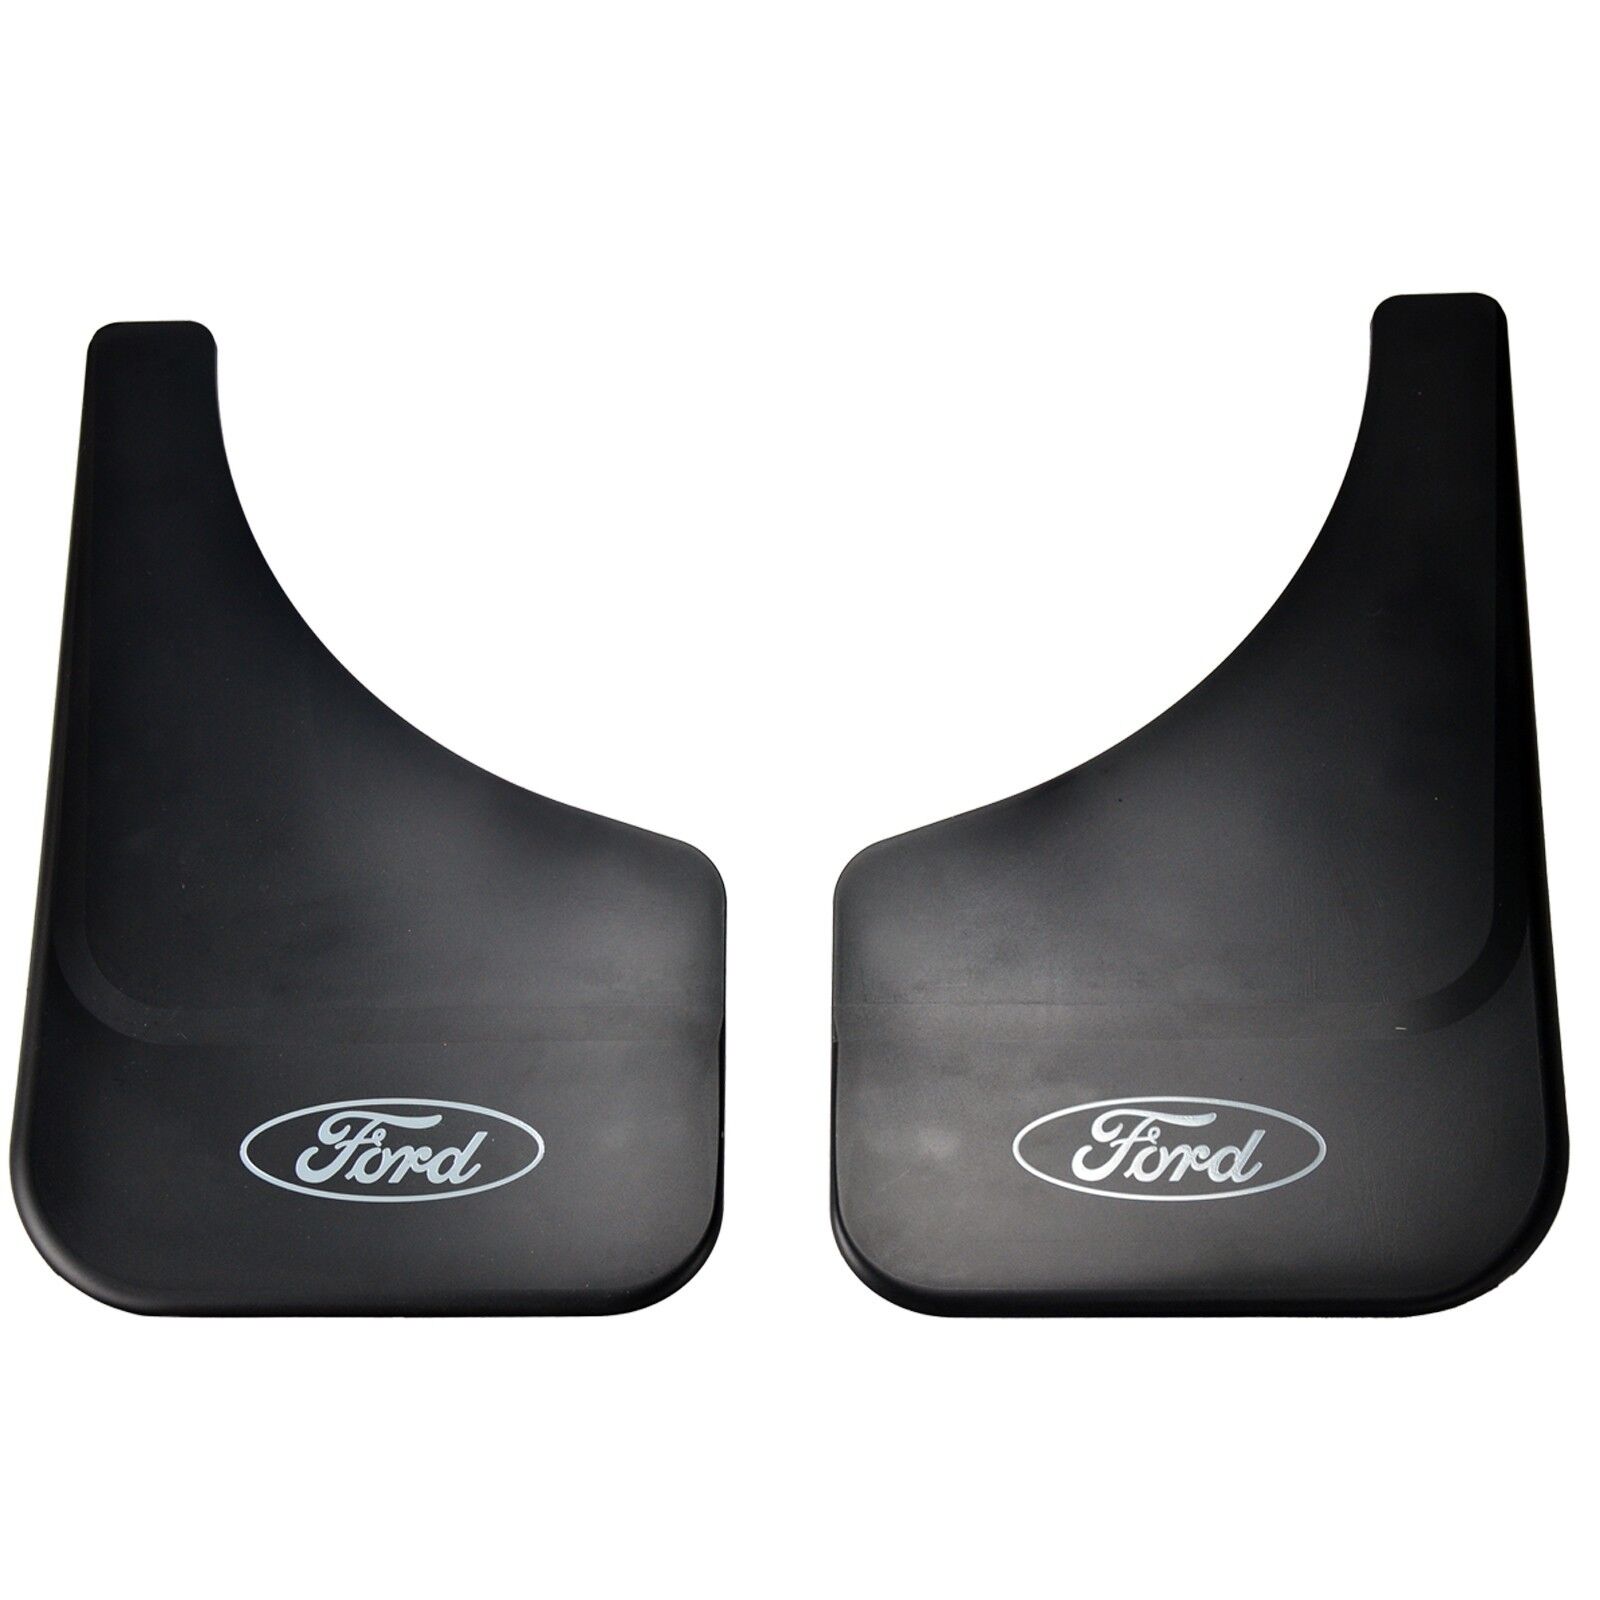 NEW OEM 2007-2017 Ford Expedition Front Mud Flap Splash Guards Pair 7L1Z16A550A